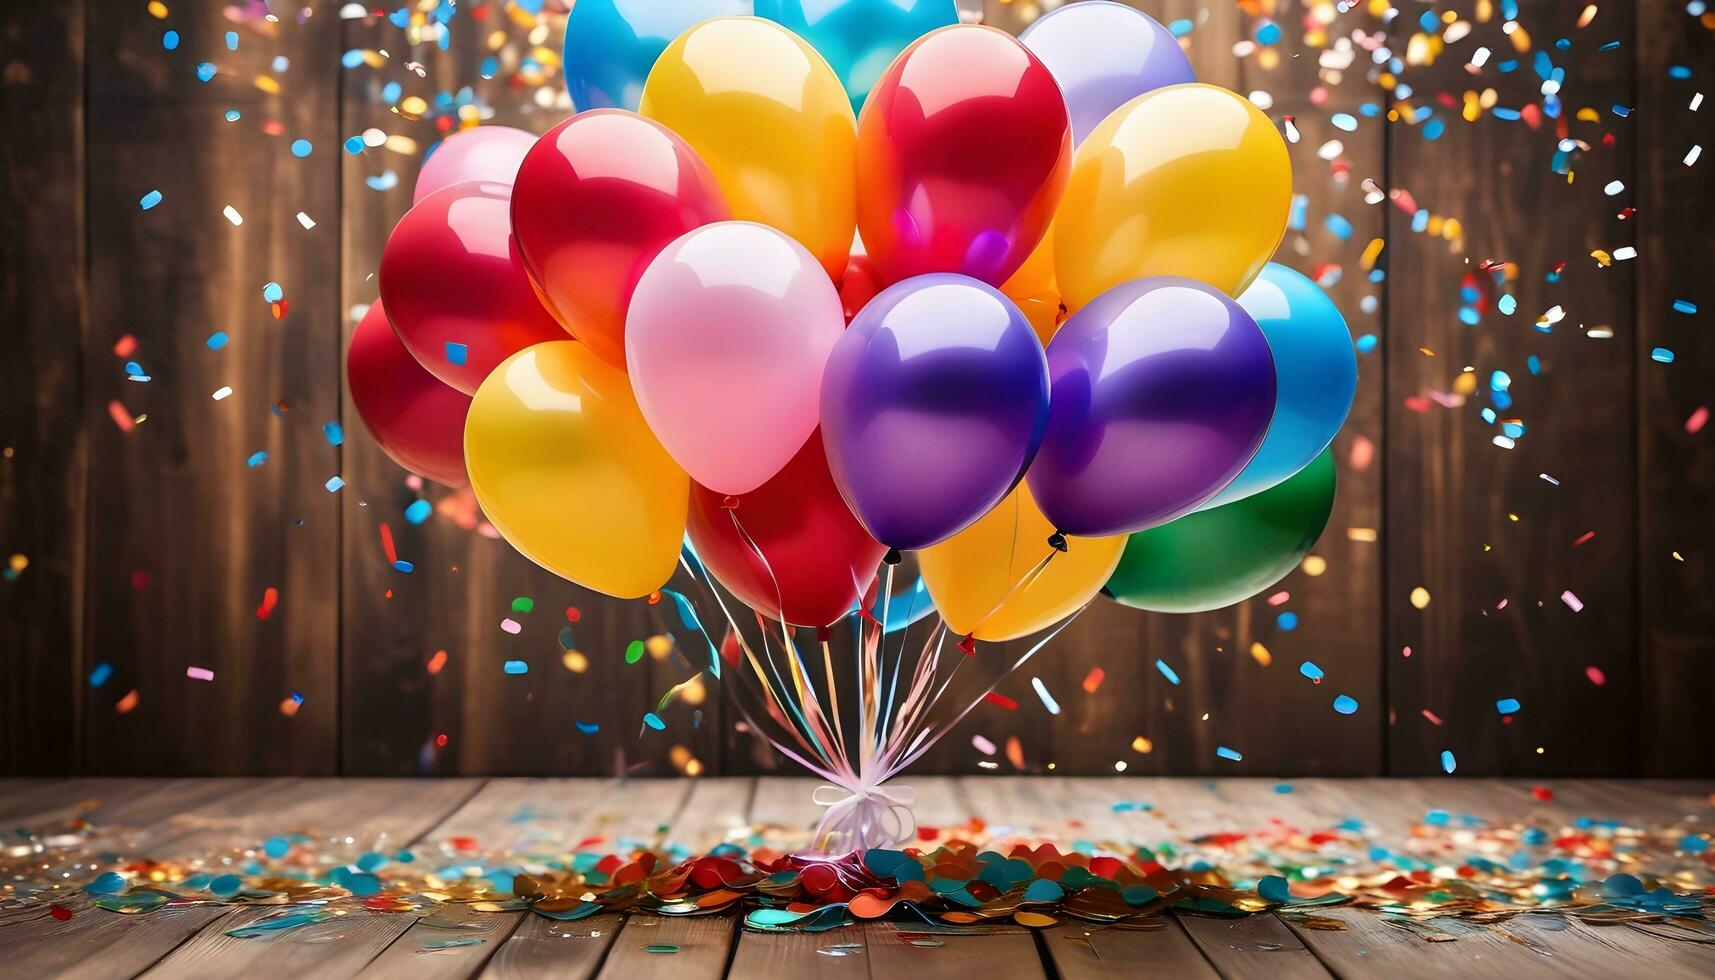 AI generated Celebratory Arrangement of Colorful Balloons on a Wooden Floor with Confetti photo